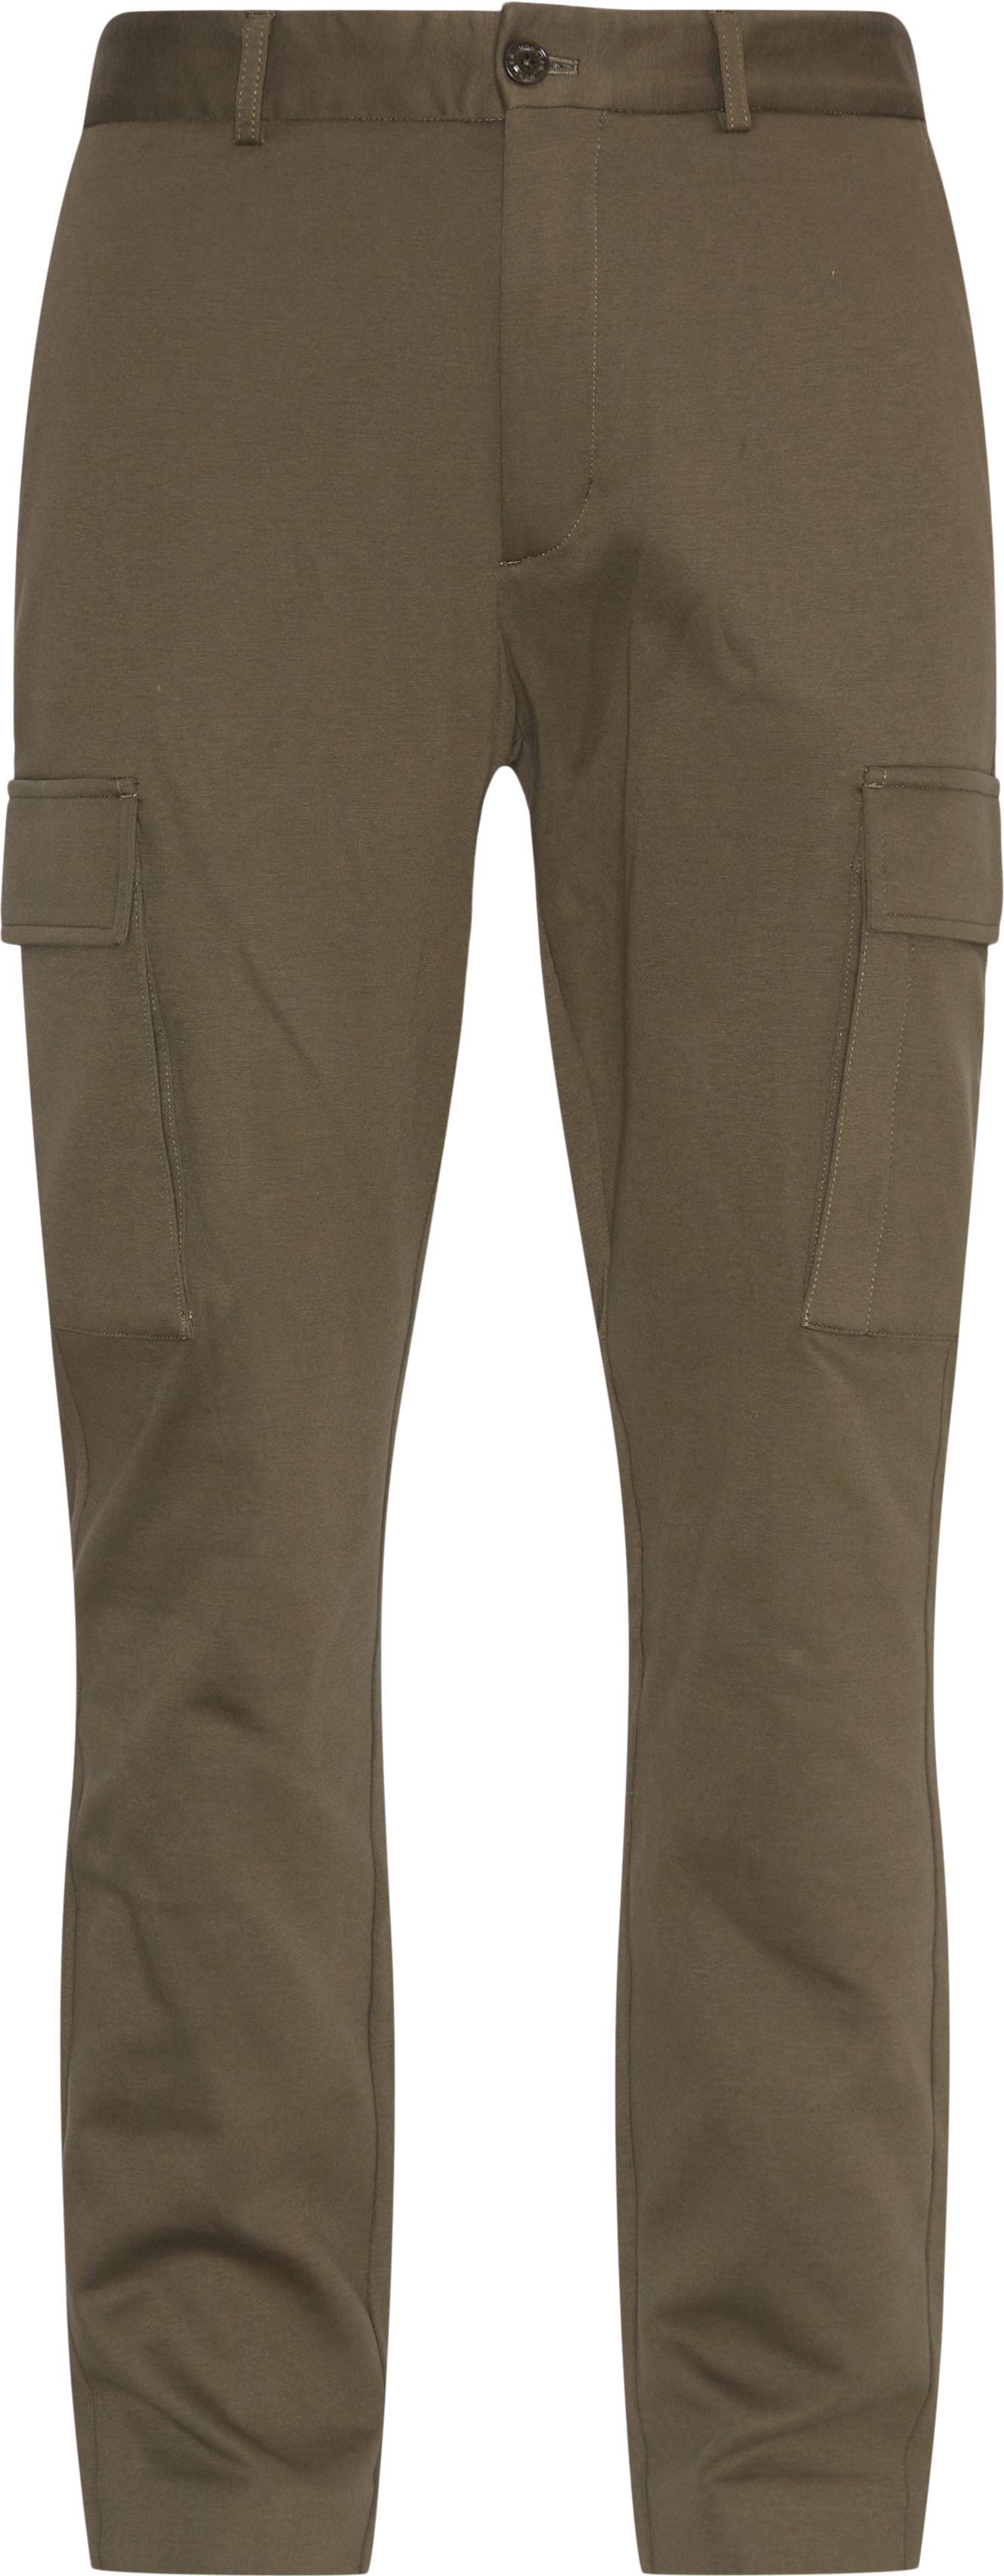 Moncler Trousers 2A00020 89AHL Army